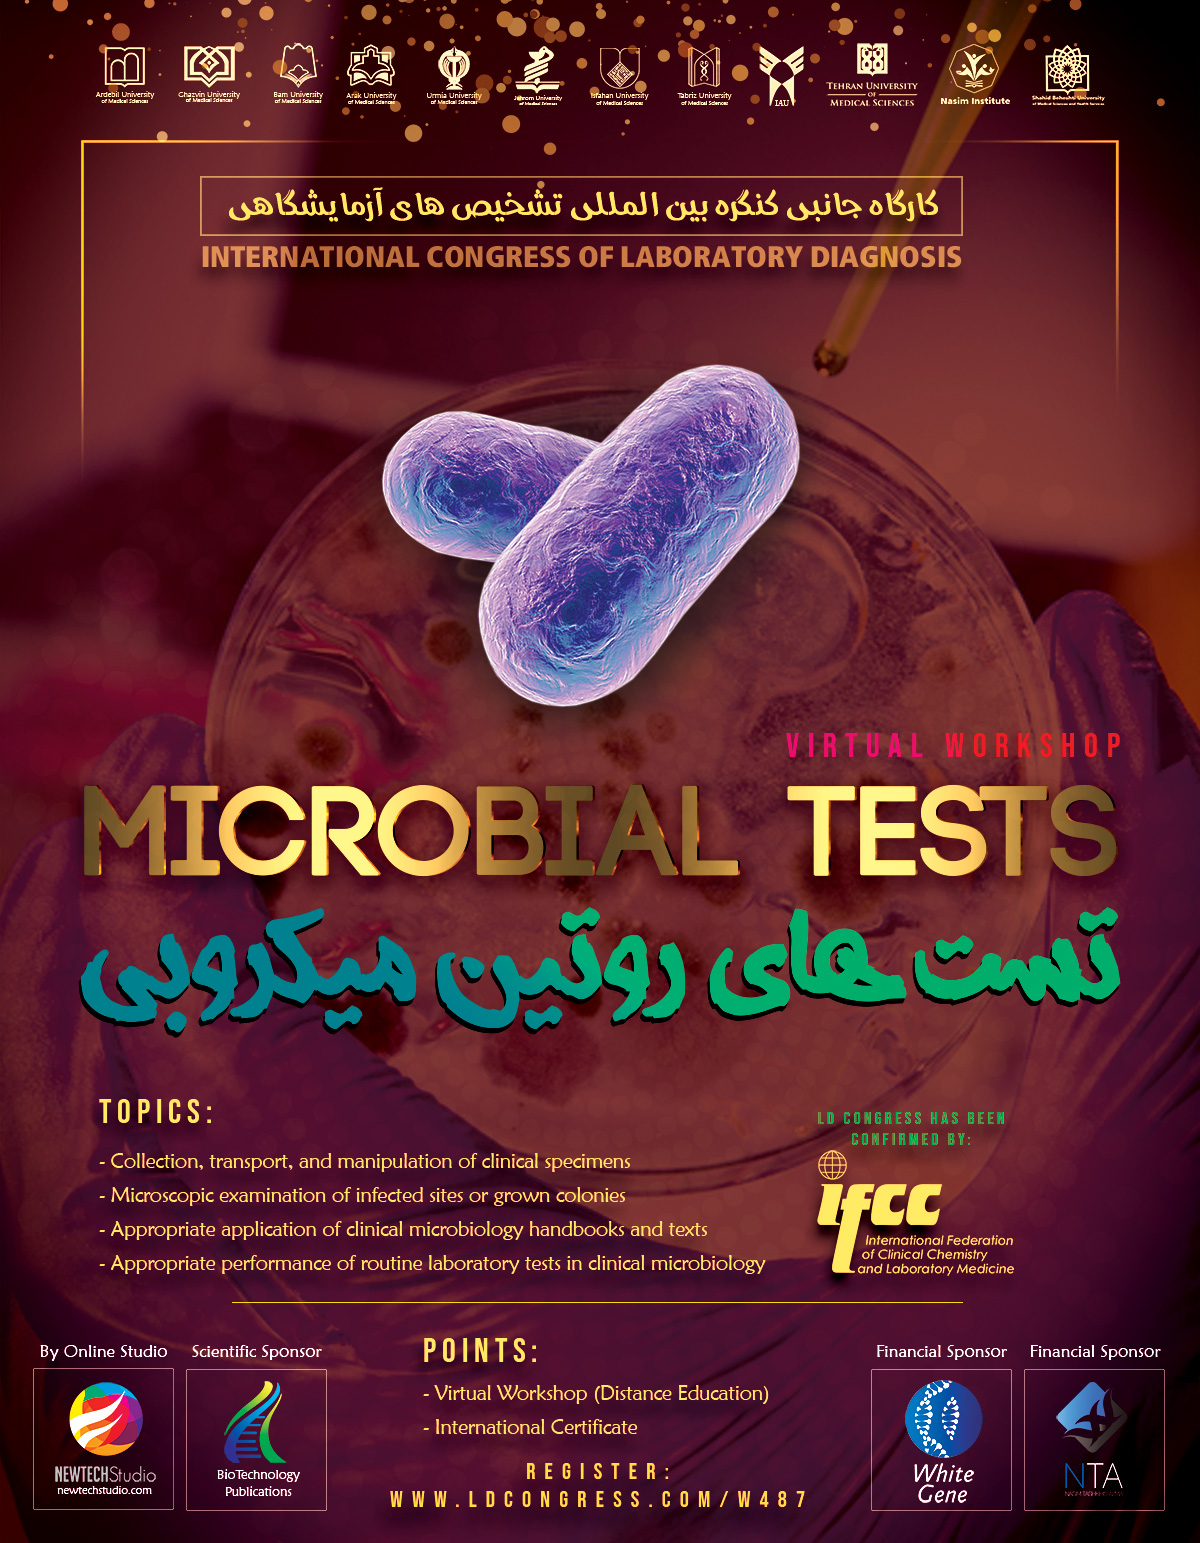 Routine Laboratory Tests in Clinical Microbiology